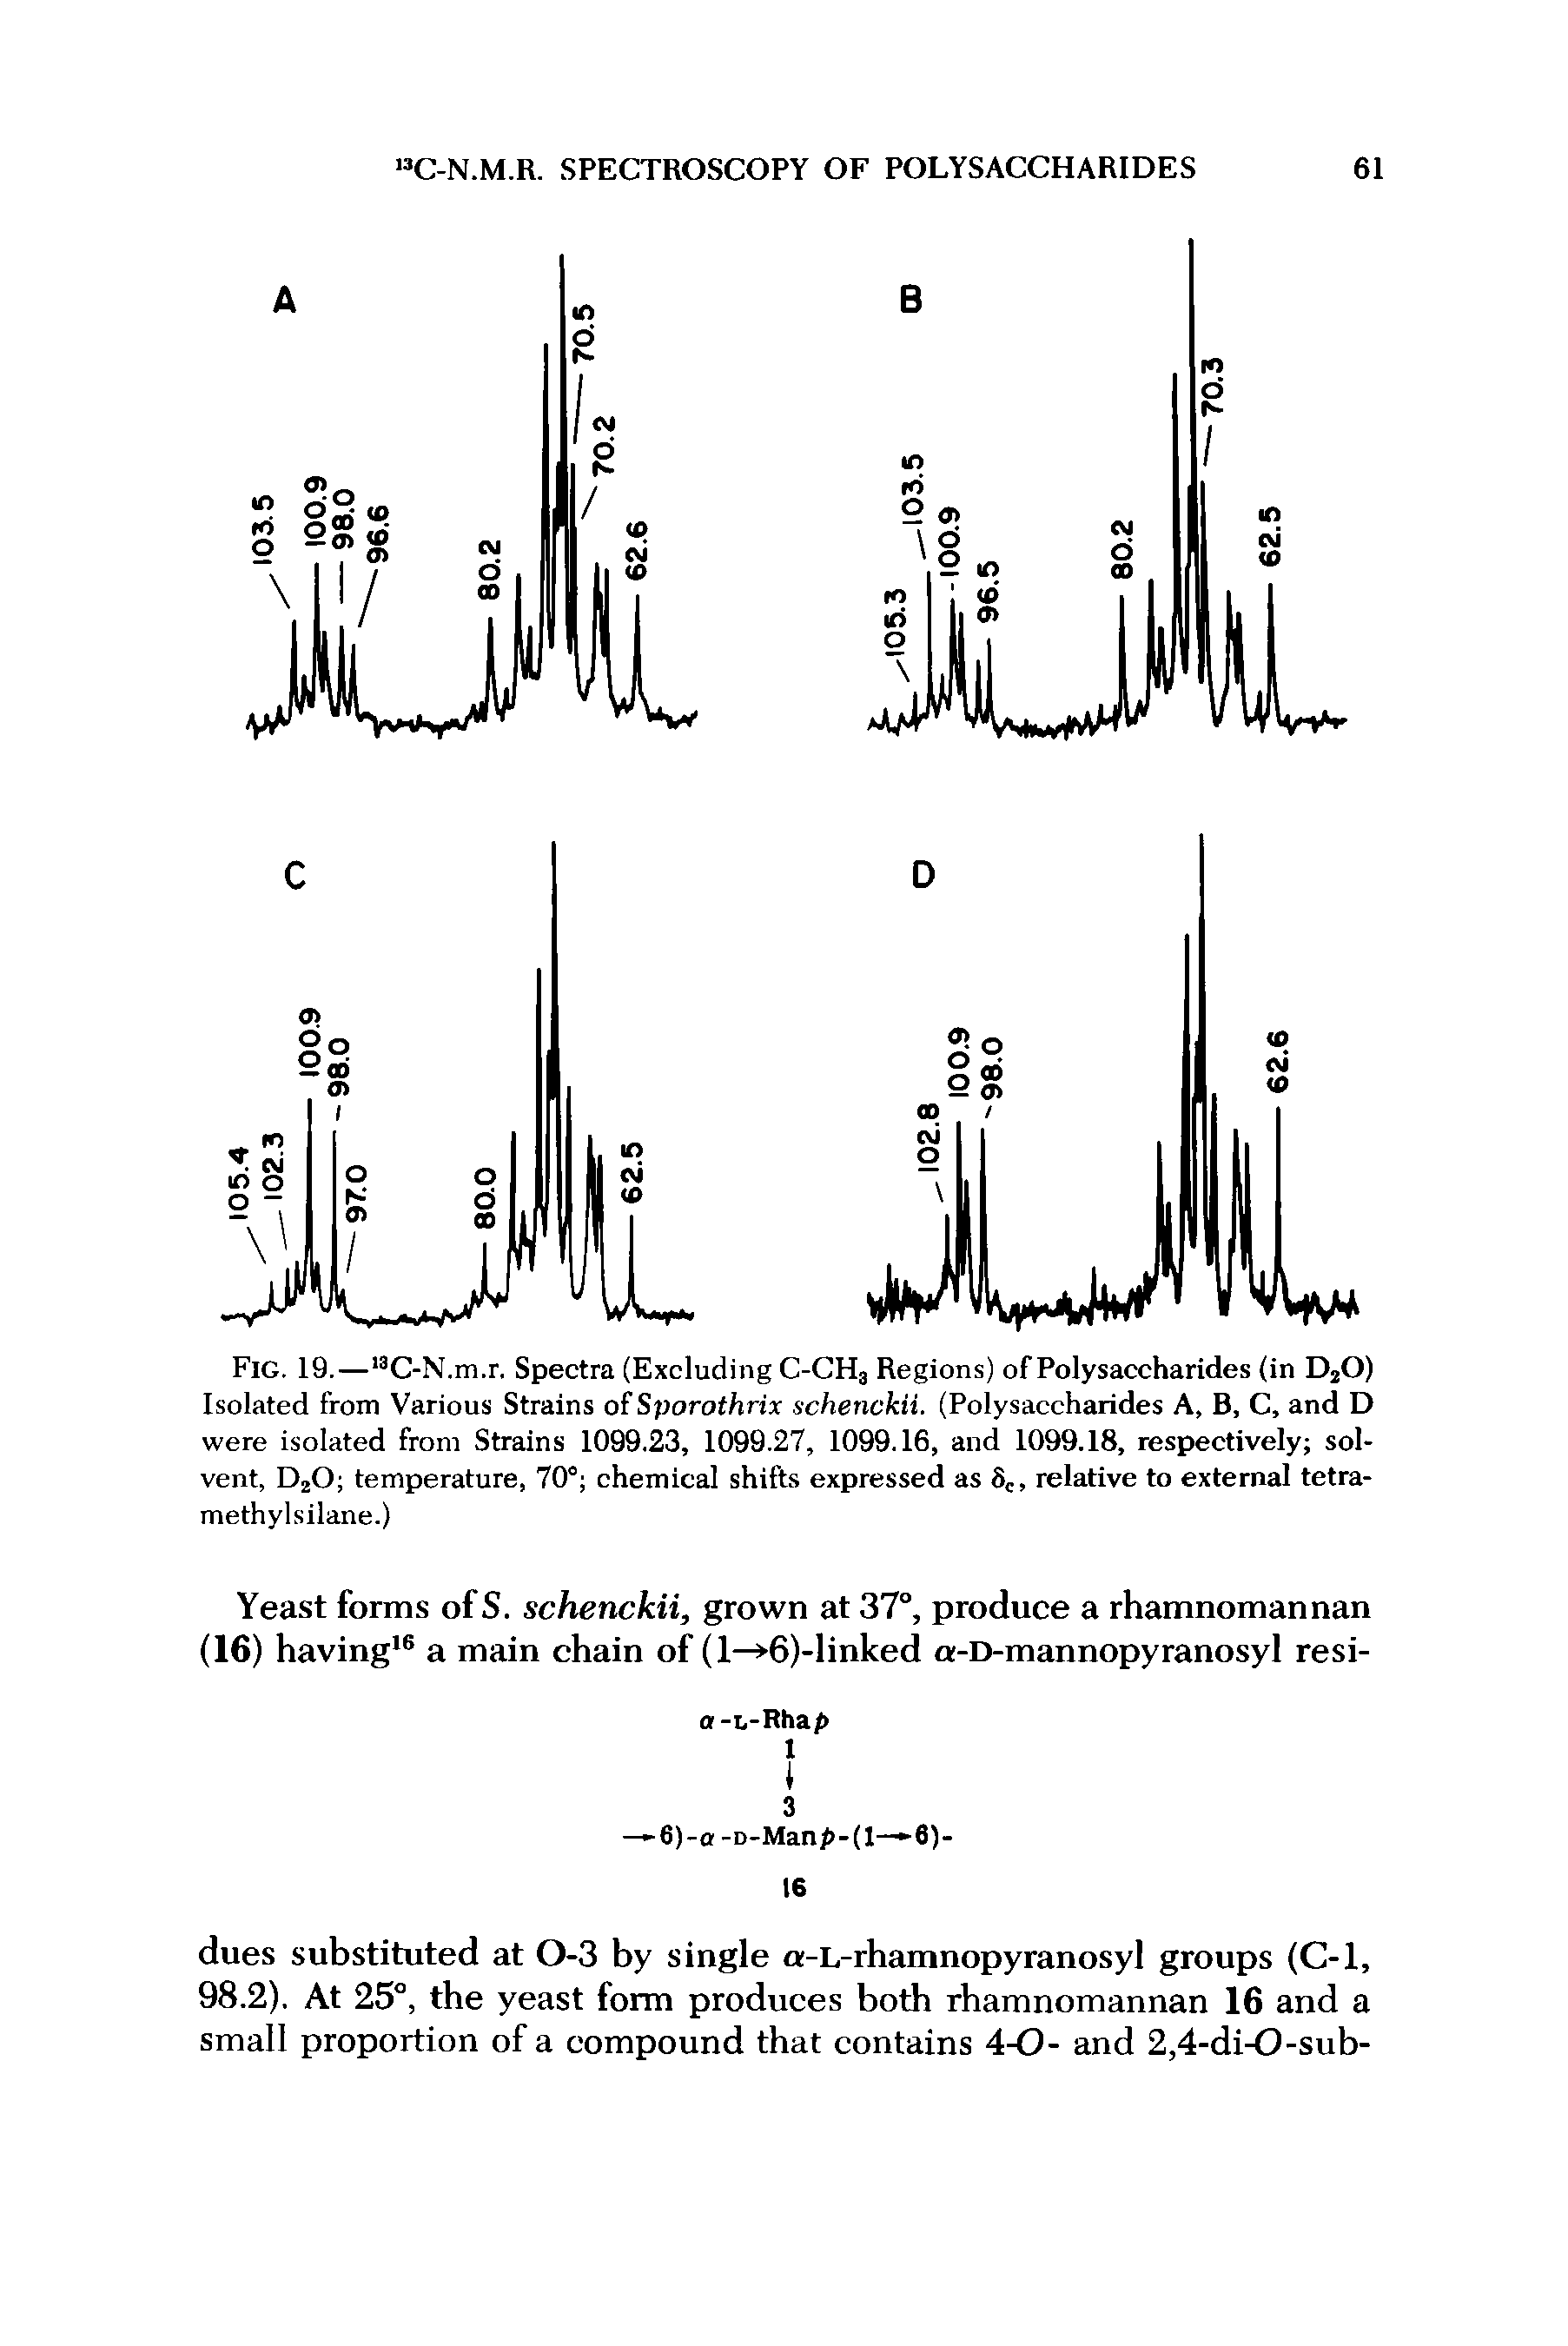 Fig. 19.—13C-N.m.r. Spectra (Excluding C-CH3 Regions) of Polysaccharides (in D20) Isolated from Various Strains of Sporothrix schenckii. (Polysaccharides A, B, C, and D were isolated from Strains 1099.23, 1099.27, 1099.16, and 1099.18, respectively solvent, D2Oj temperature, 70° chemical shifts expressed as Sc, relative to external tetra-methylsilane.)...